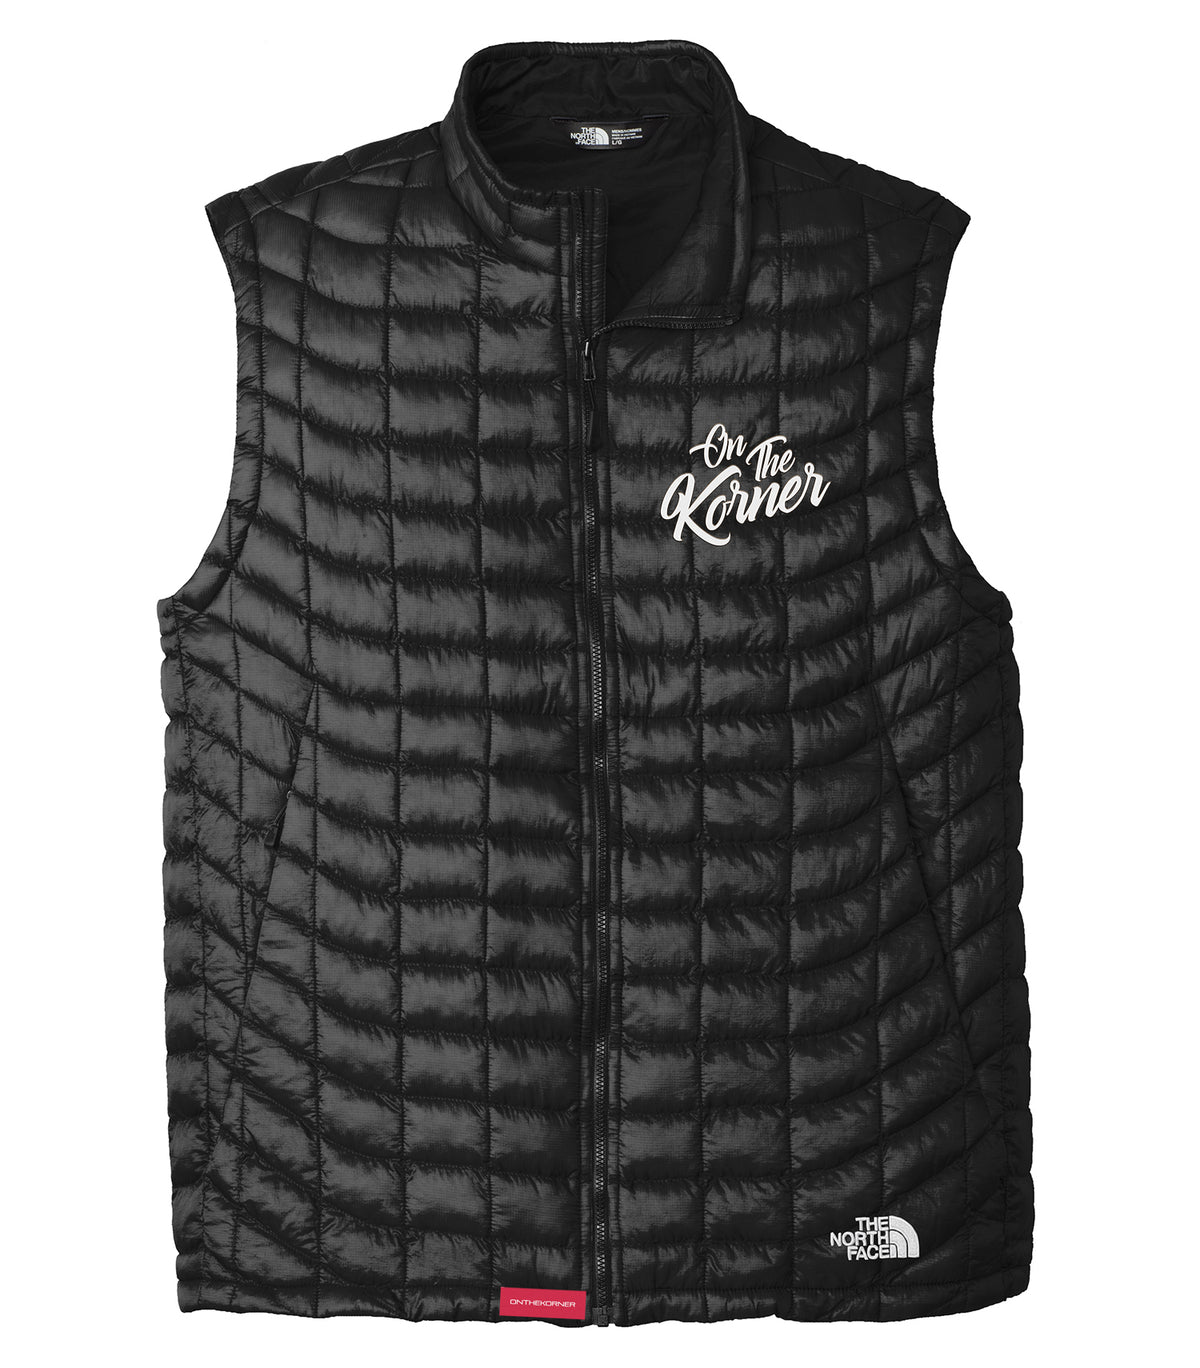 Onthekorner x The North Face® Grey Thermoball Trekker Vest